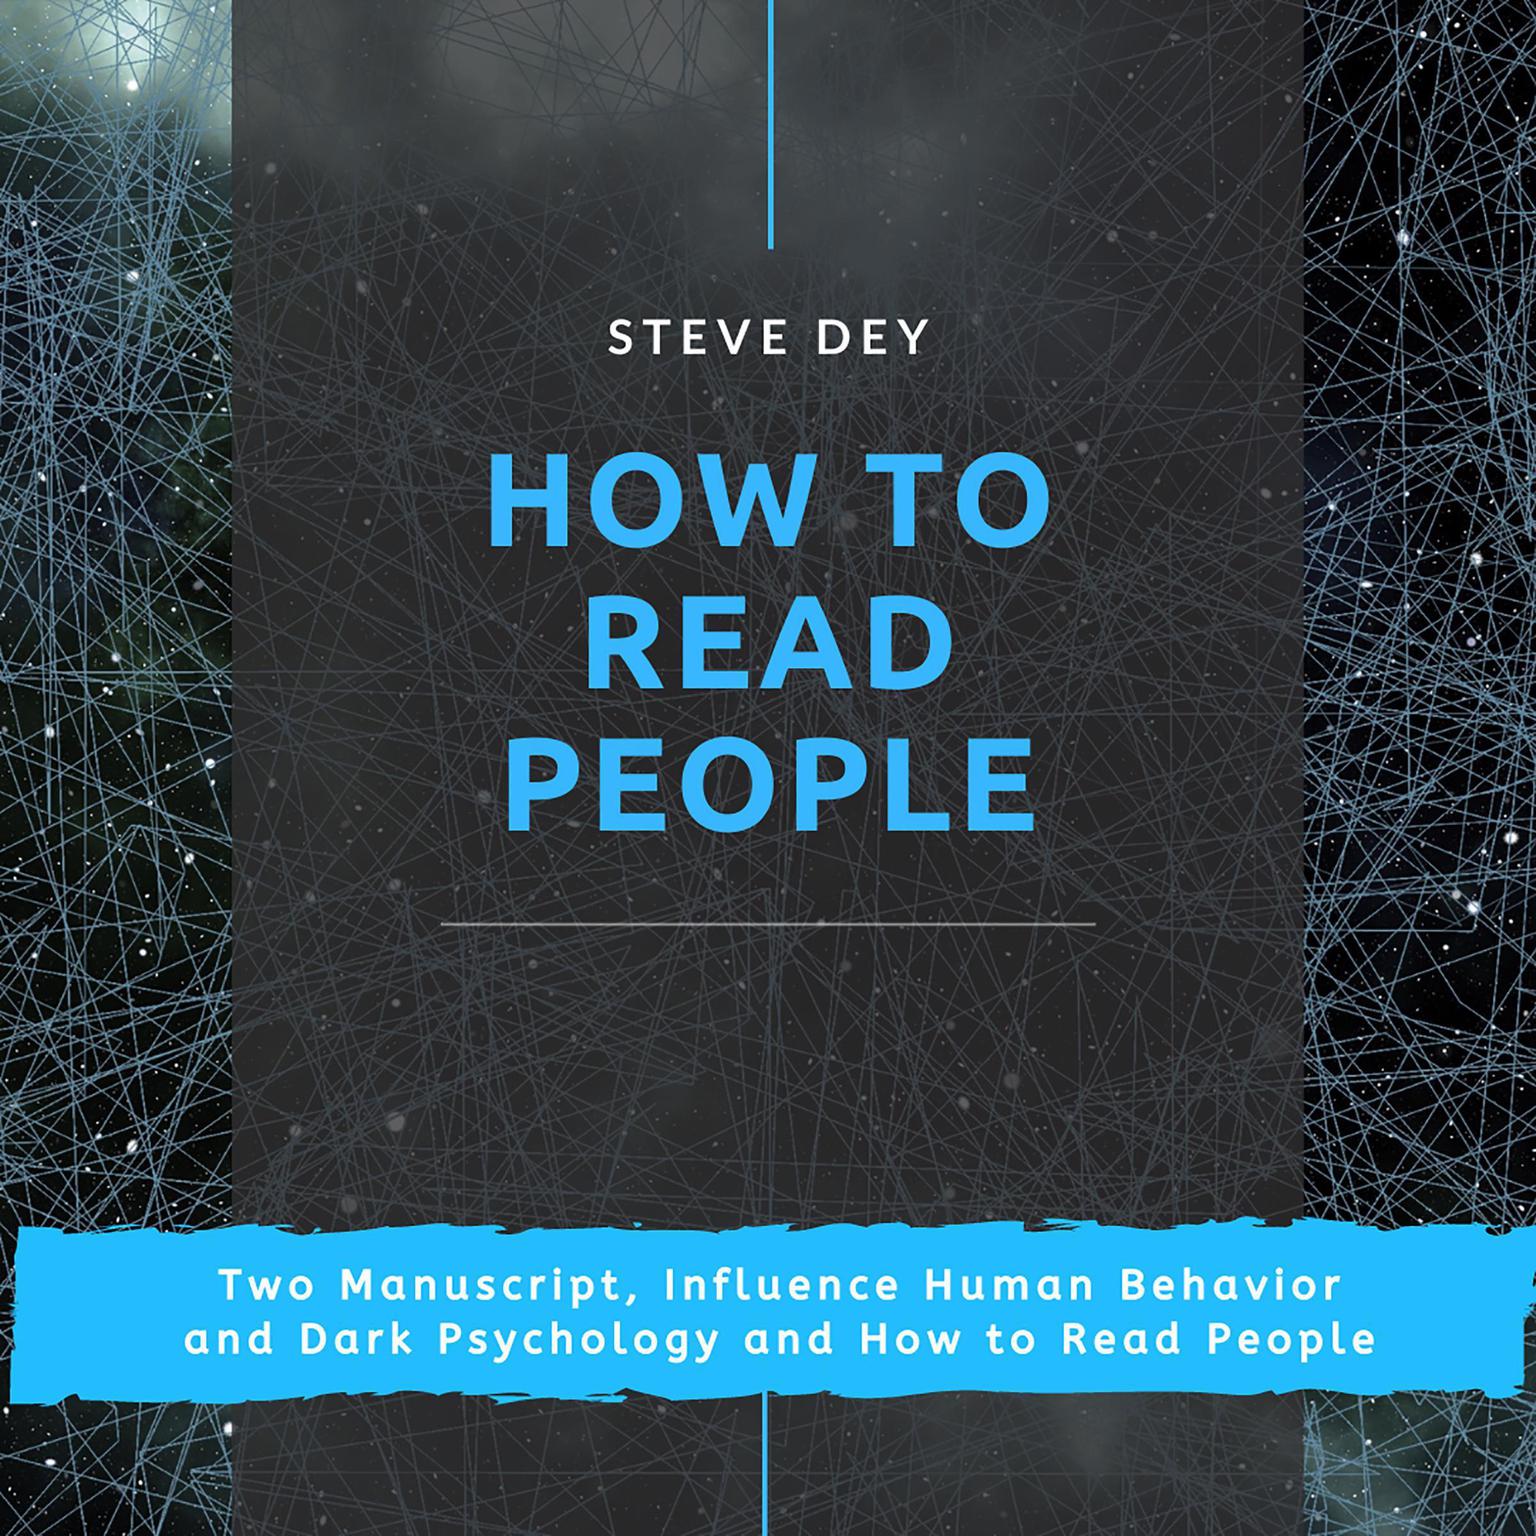 How to Read People: Two Manuscript, Influence Human Behavior and Dark Psychology and How to Read People Audiobook, by Steve Dey